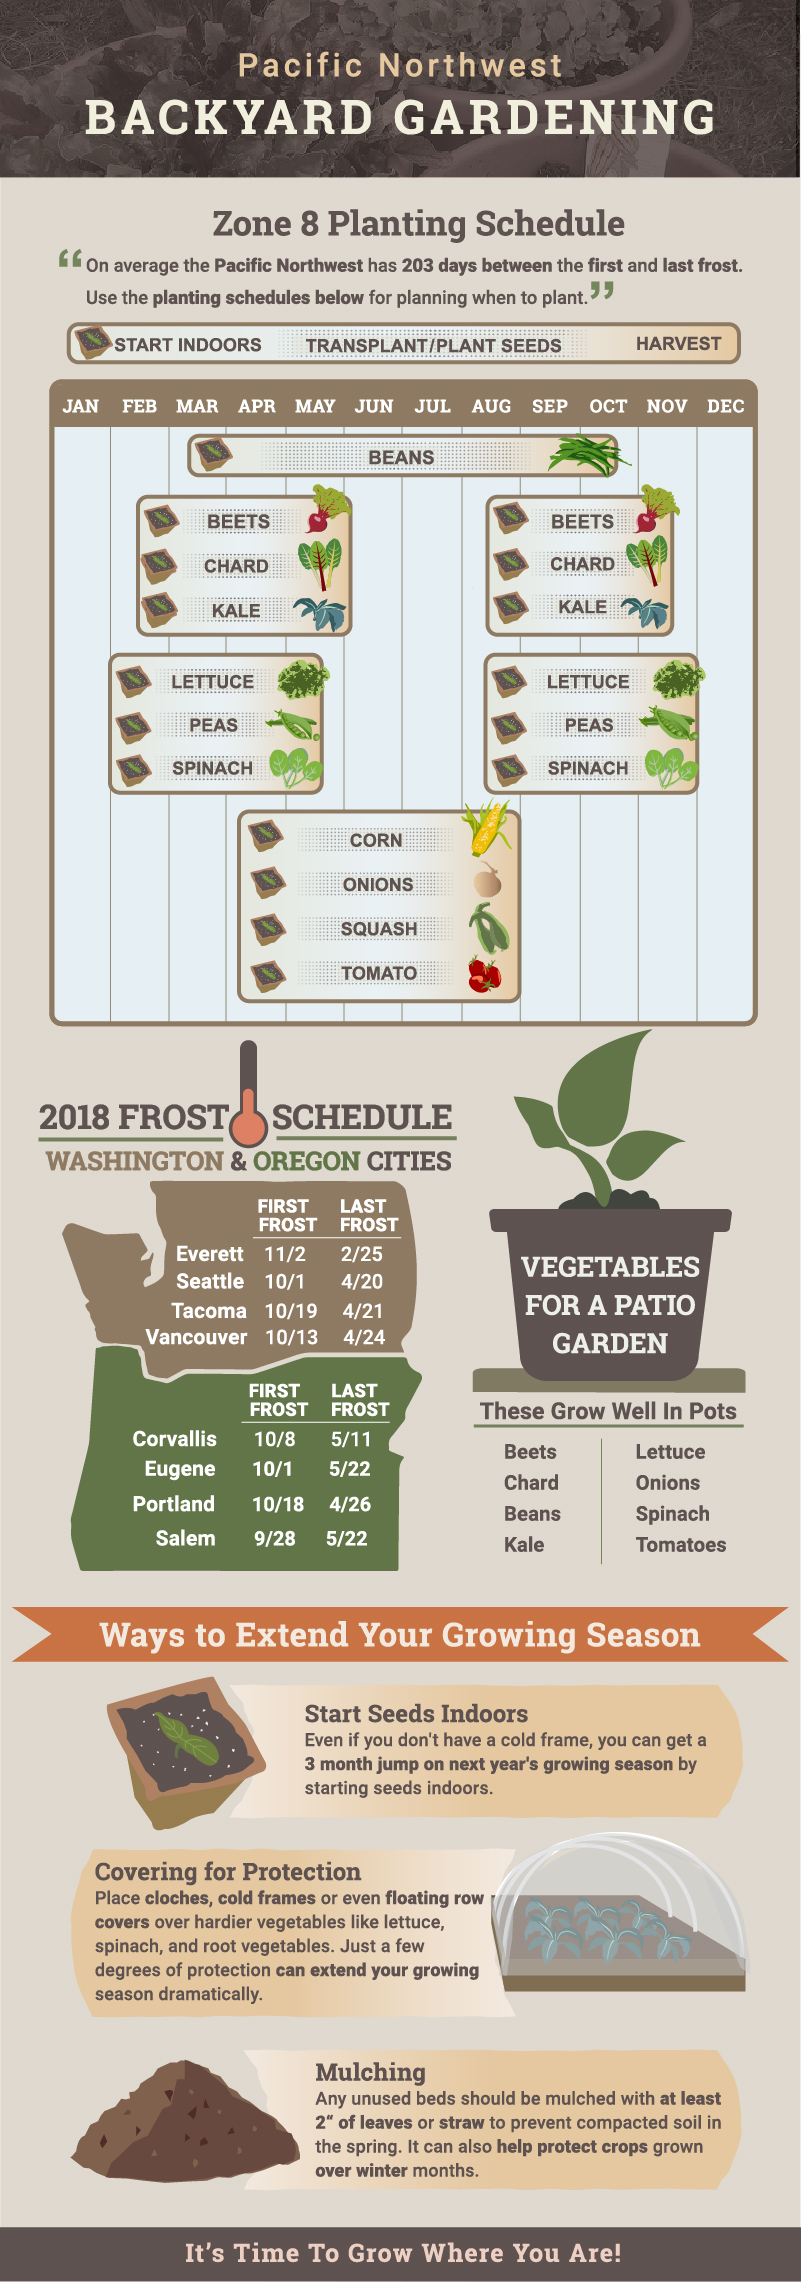 Planting Guide for Pacific Northwest